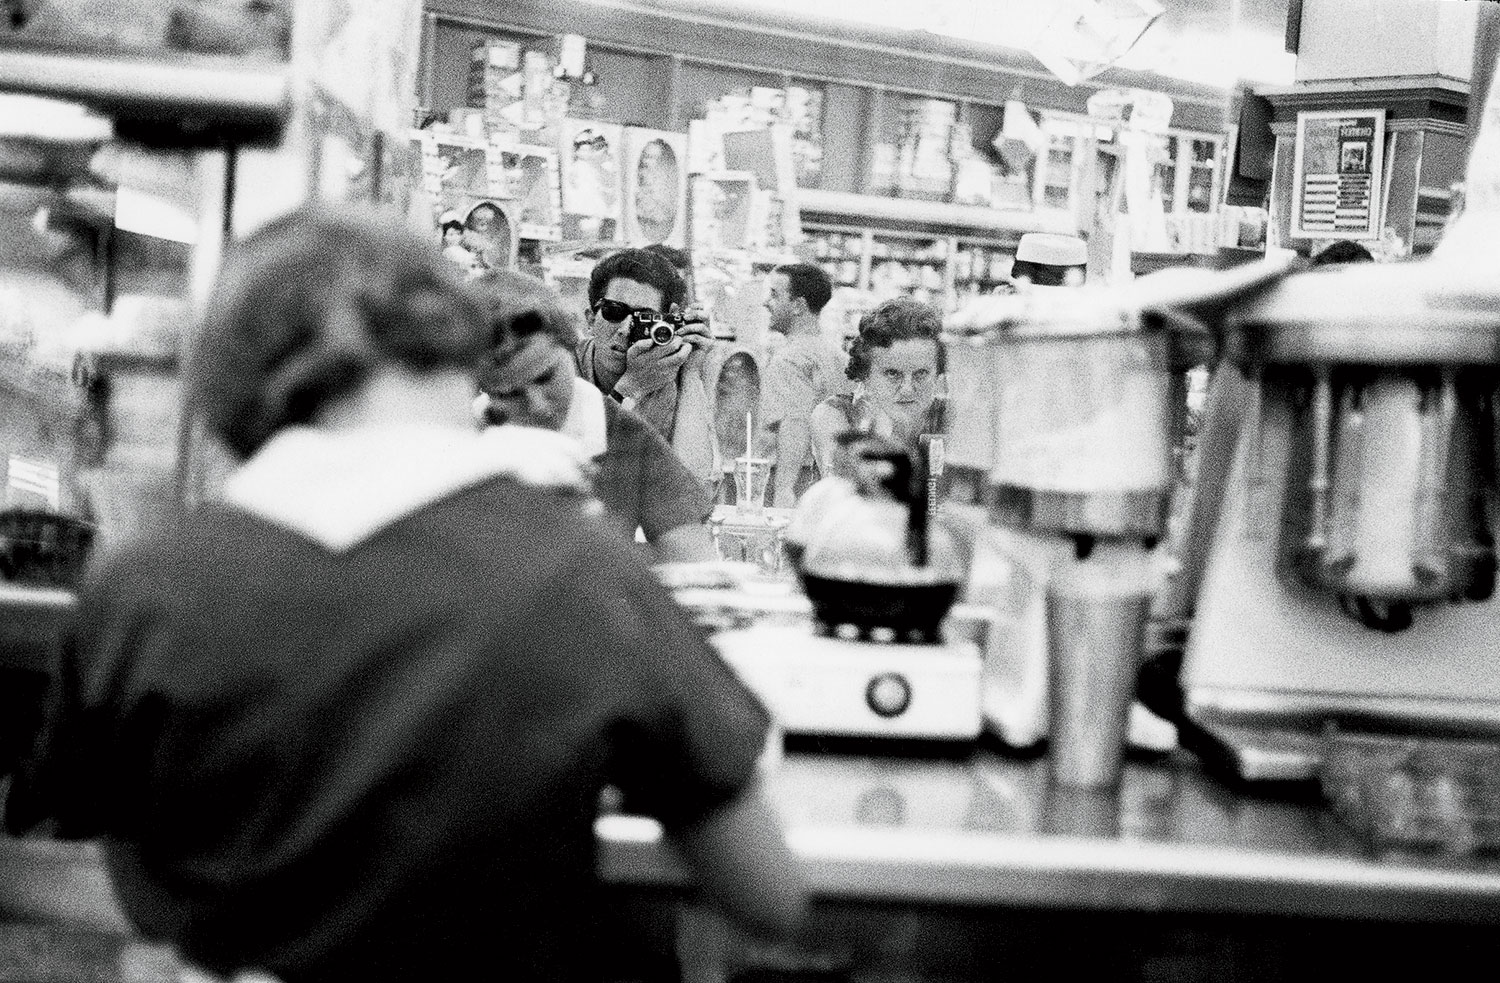 A 1964 photo of Jay King in the mirror of the busy Woolworth’s diner.